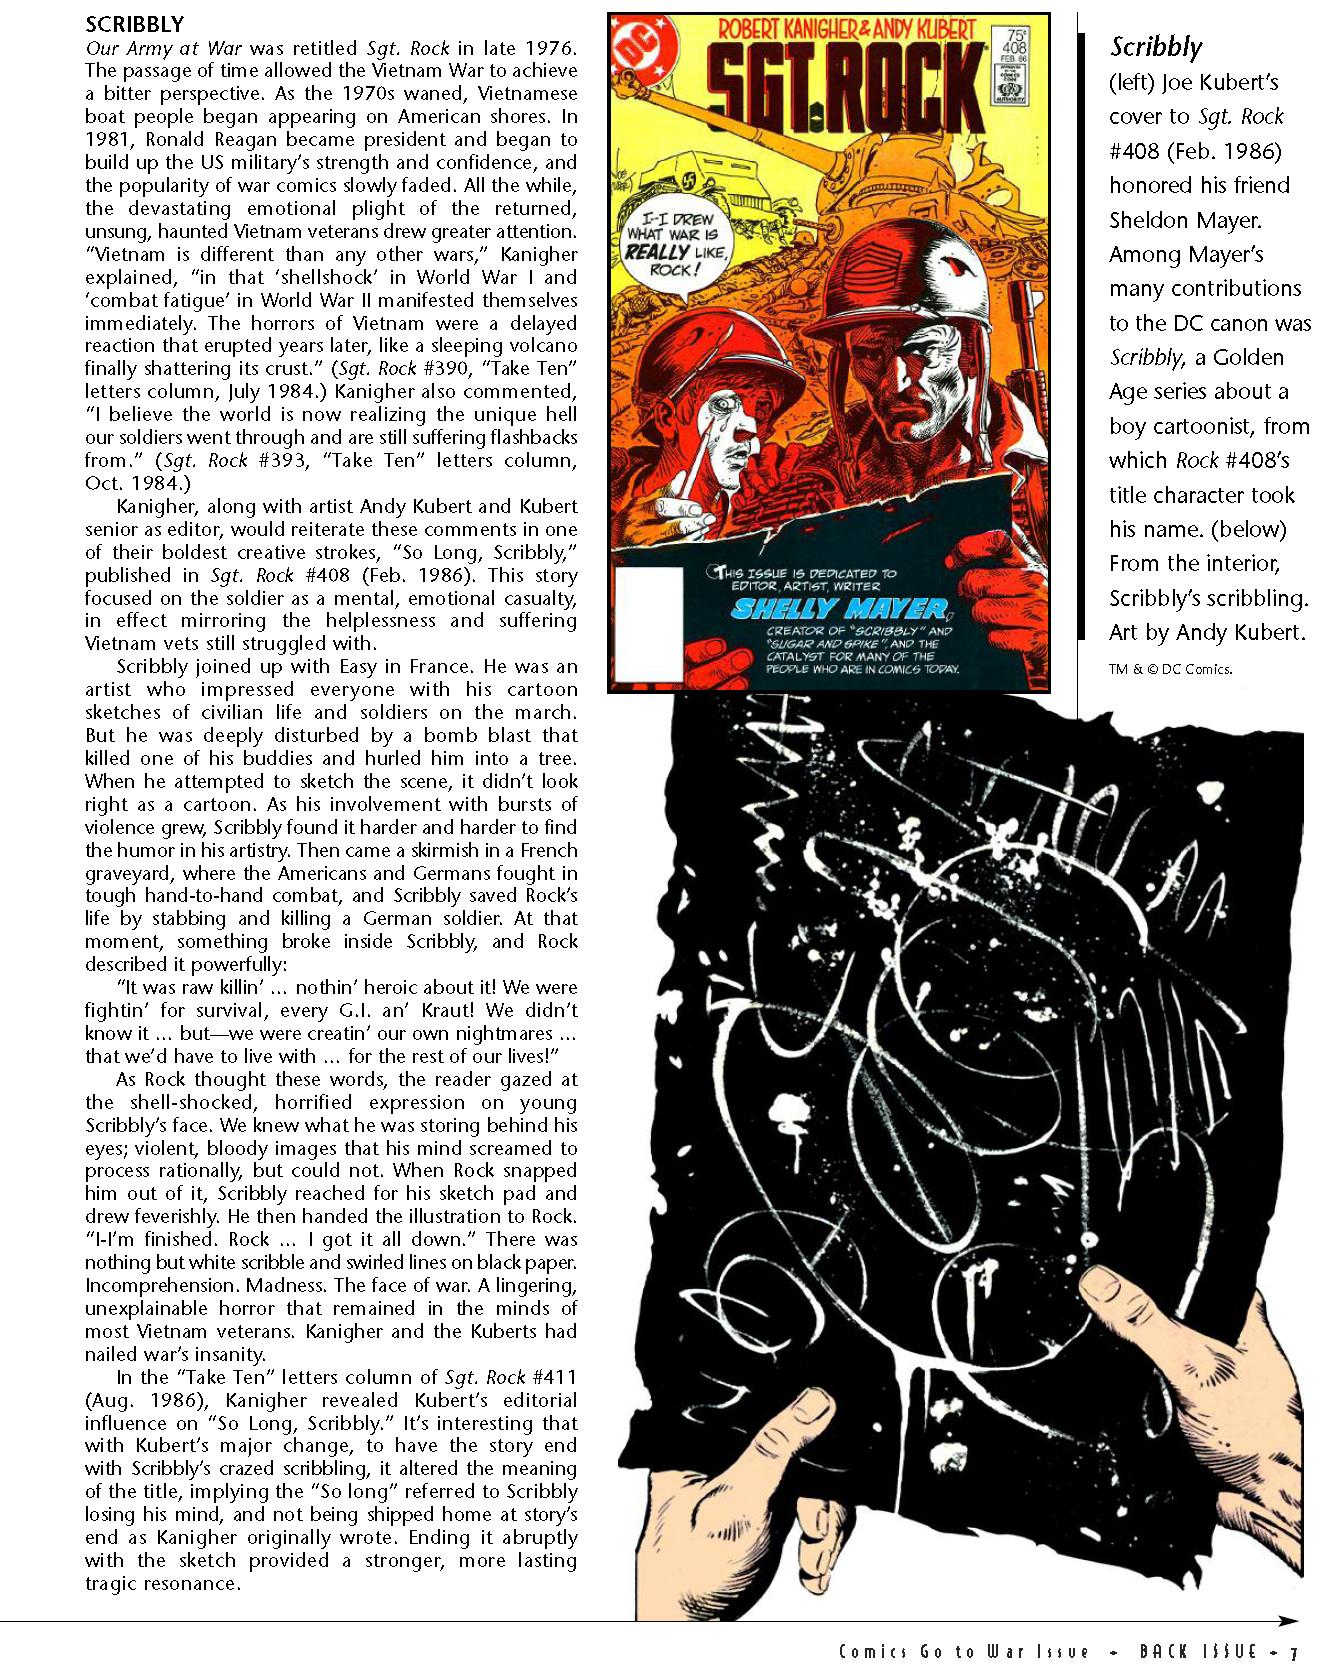 Read online Back Issue comic -  Issue #37 - 9